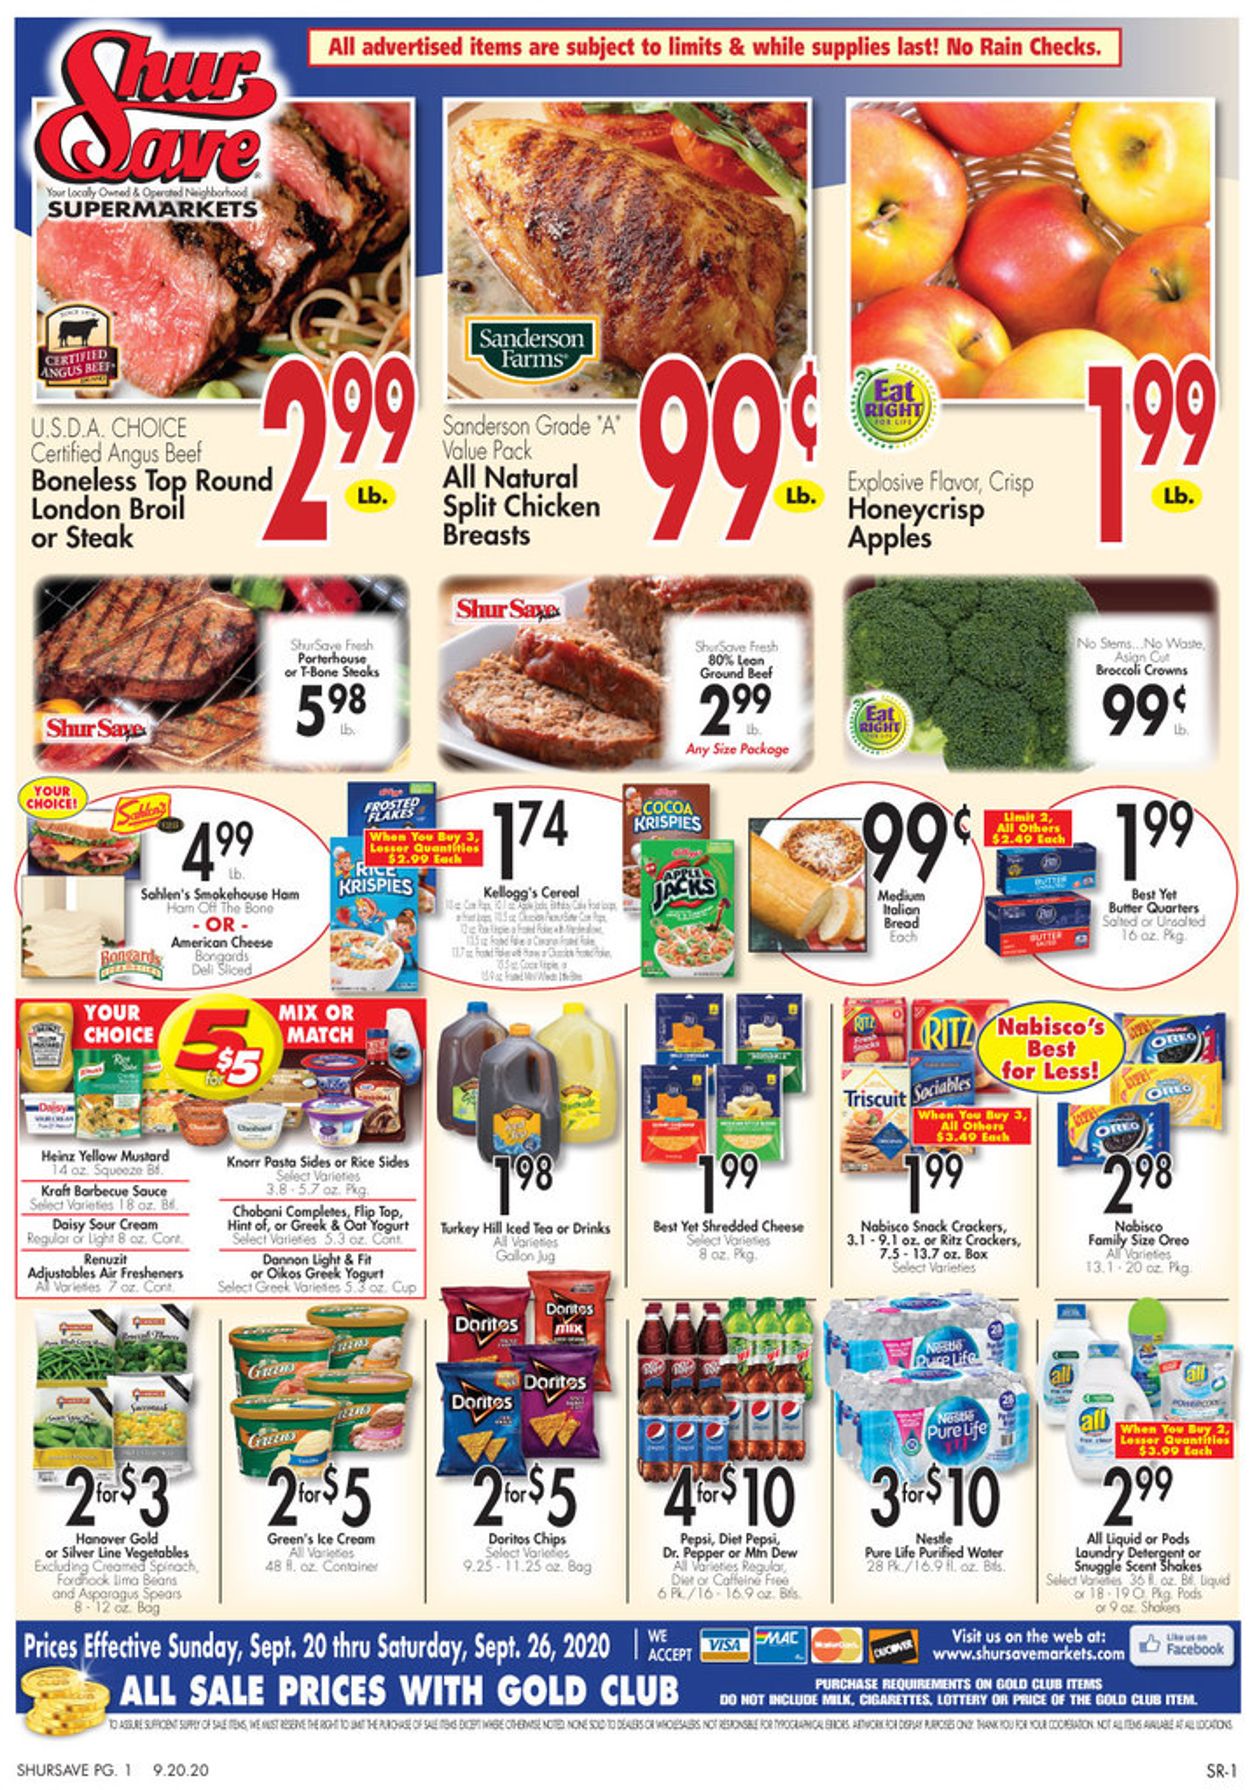 Gerrity's Supermarkets Current weekly ad 09/20 - 09/26/2020 - frequent ...